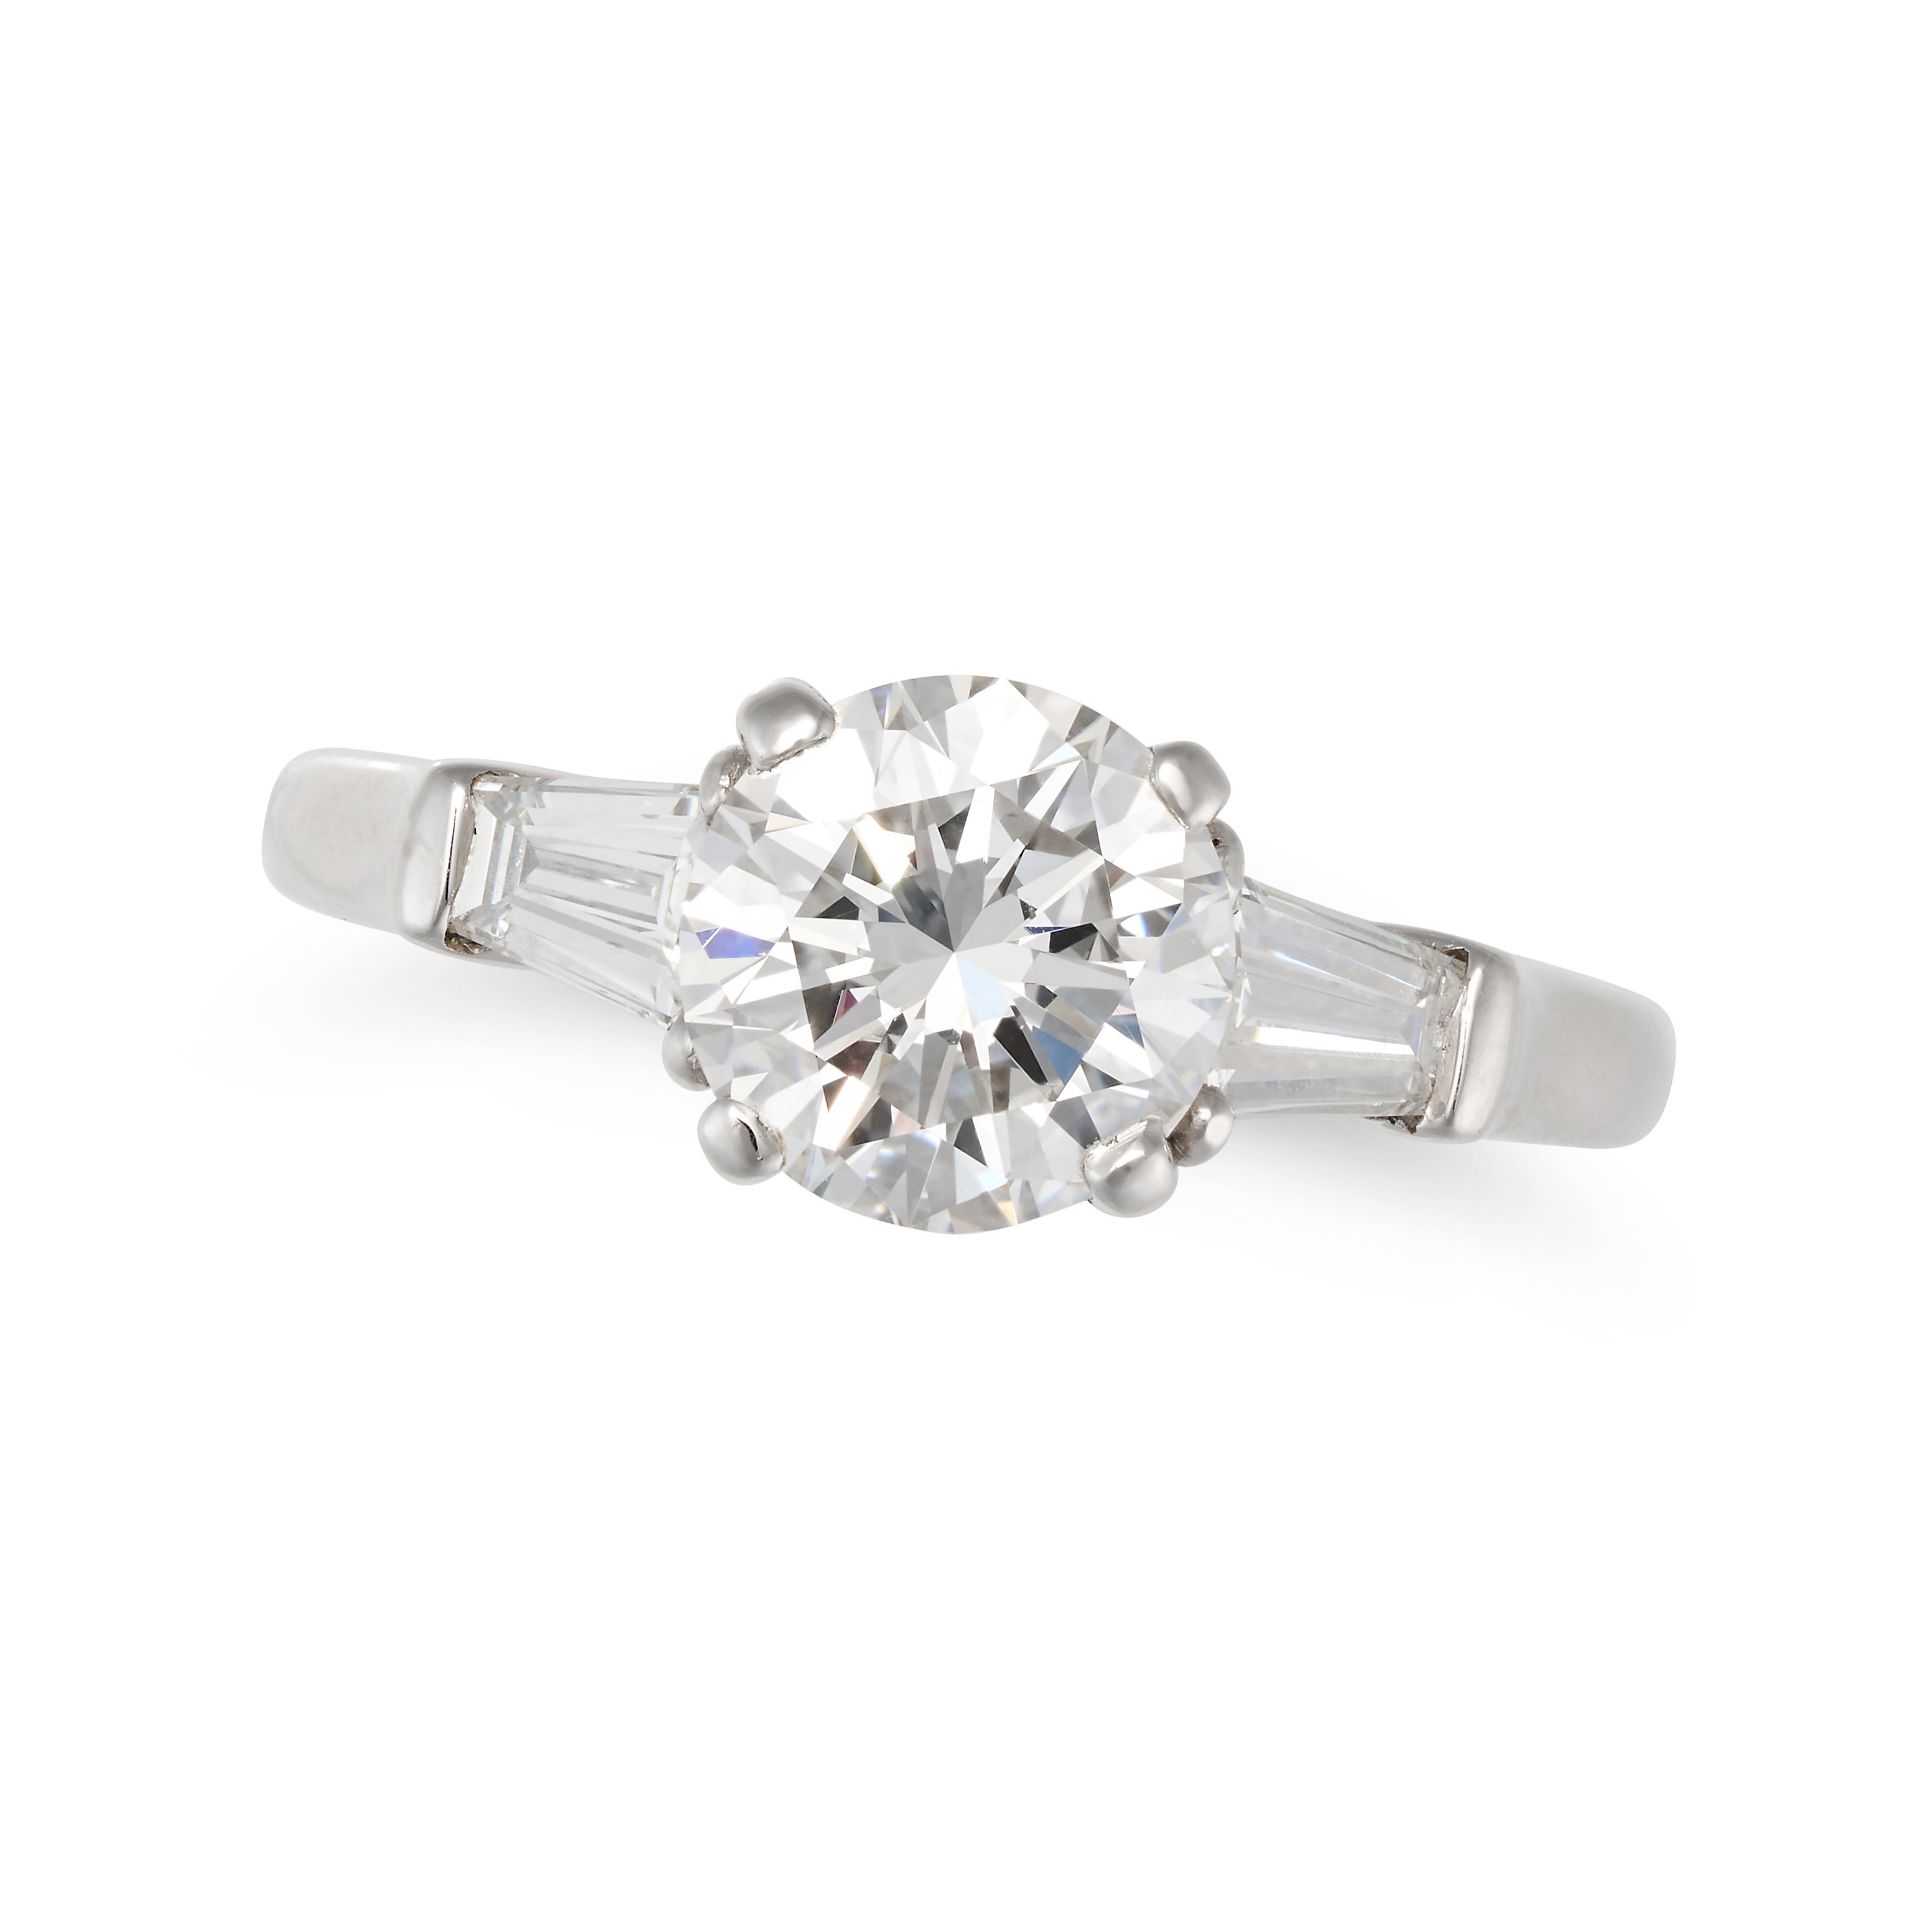 GRAFF, A 1.47 CARAT D COLOUR SOLITAIRE DIAMOND RING in 18ct white gold, set with a round brillian...